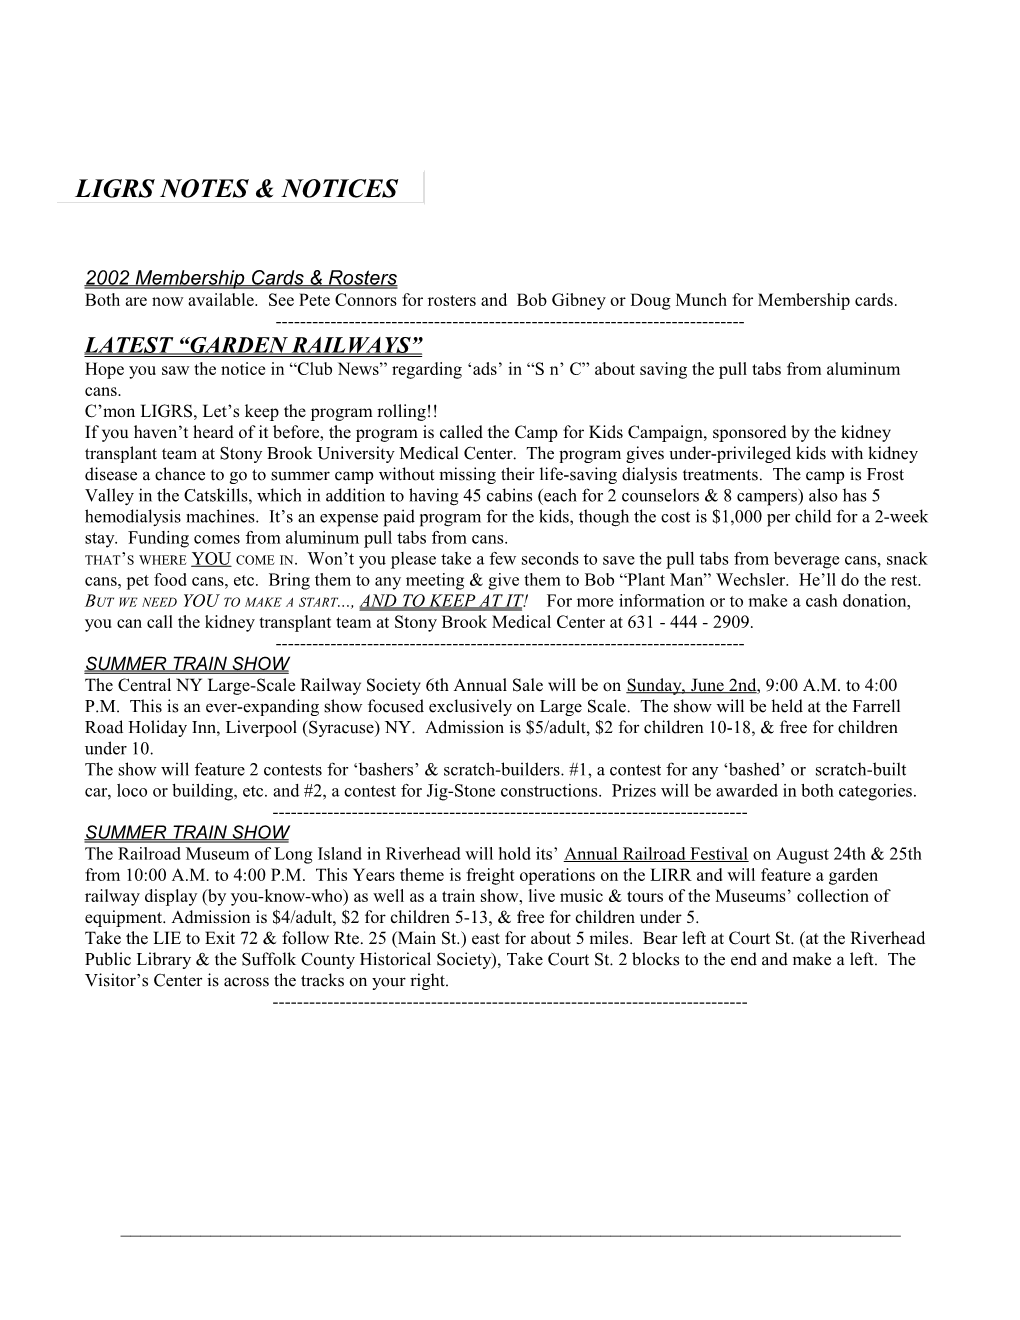 Ligrs Notes & Notices